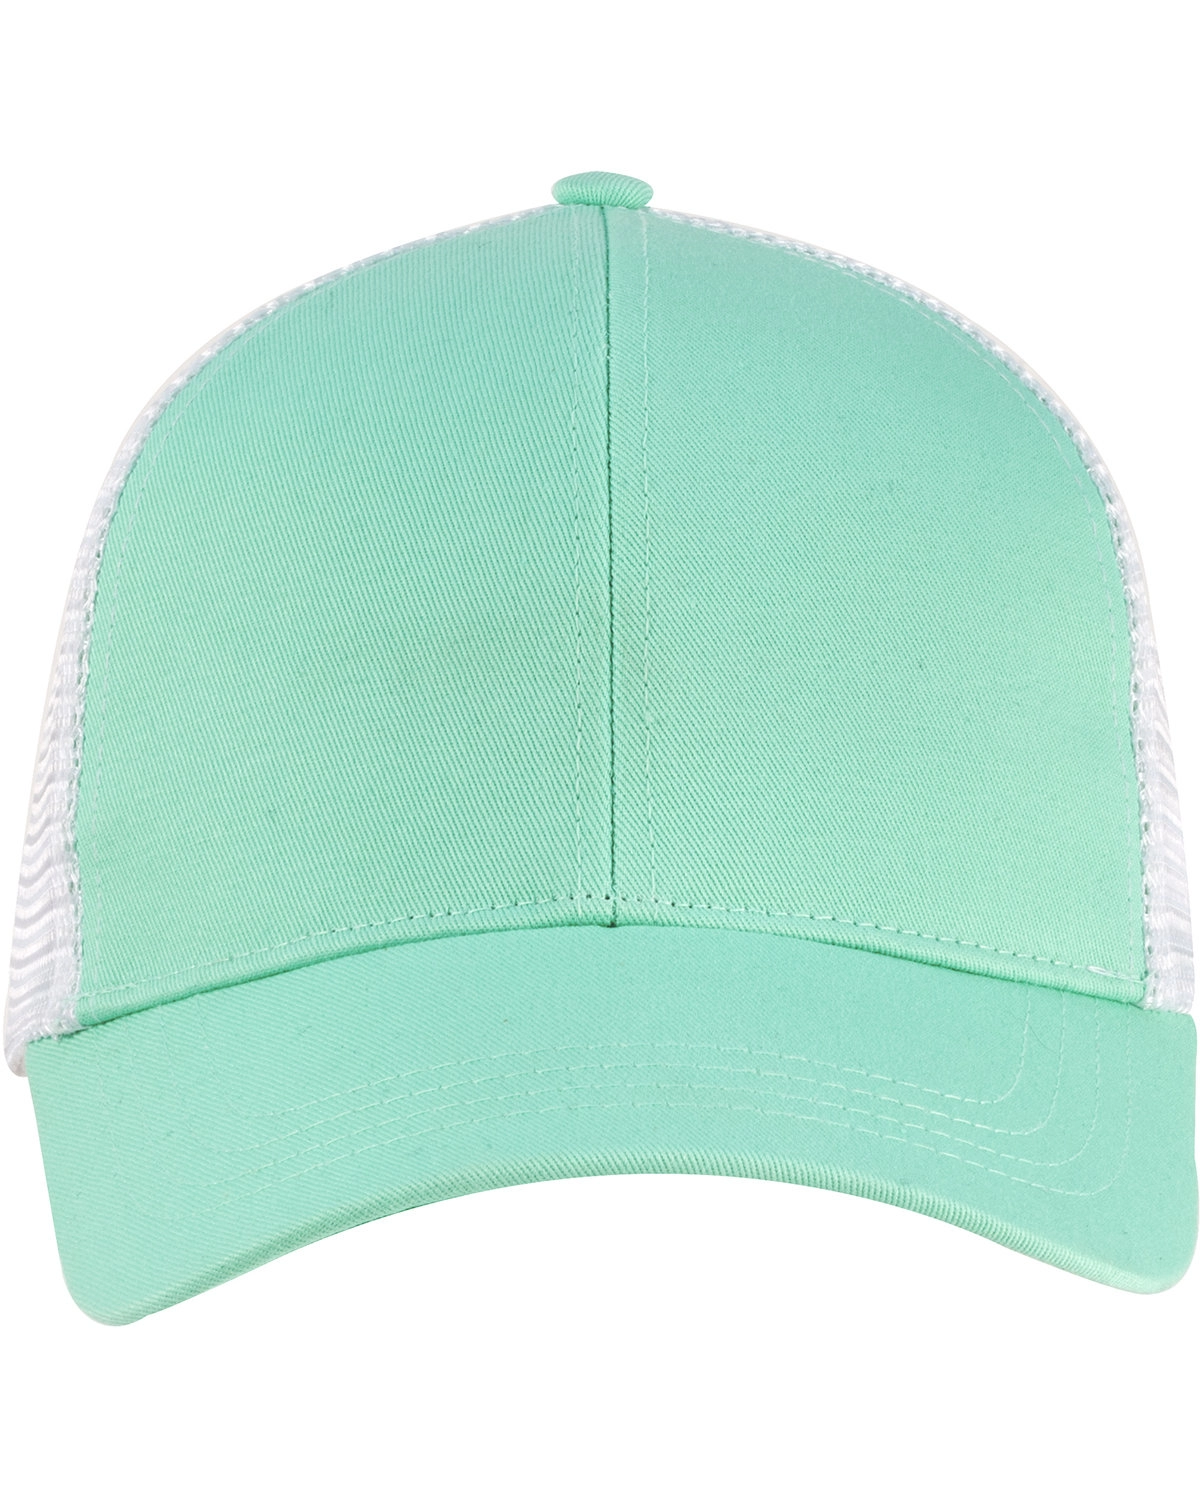 econscious EC7070 Organic/Recycled Eco Trucker - From